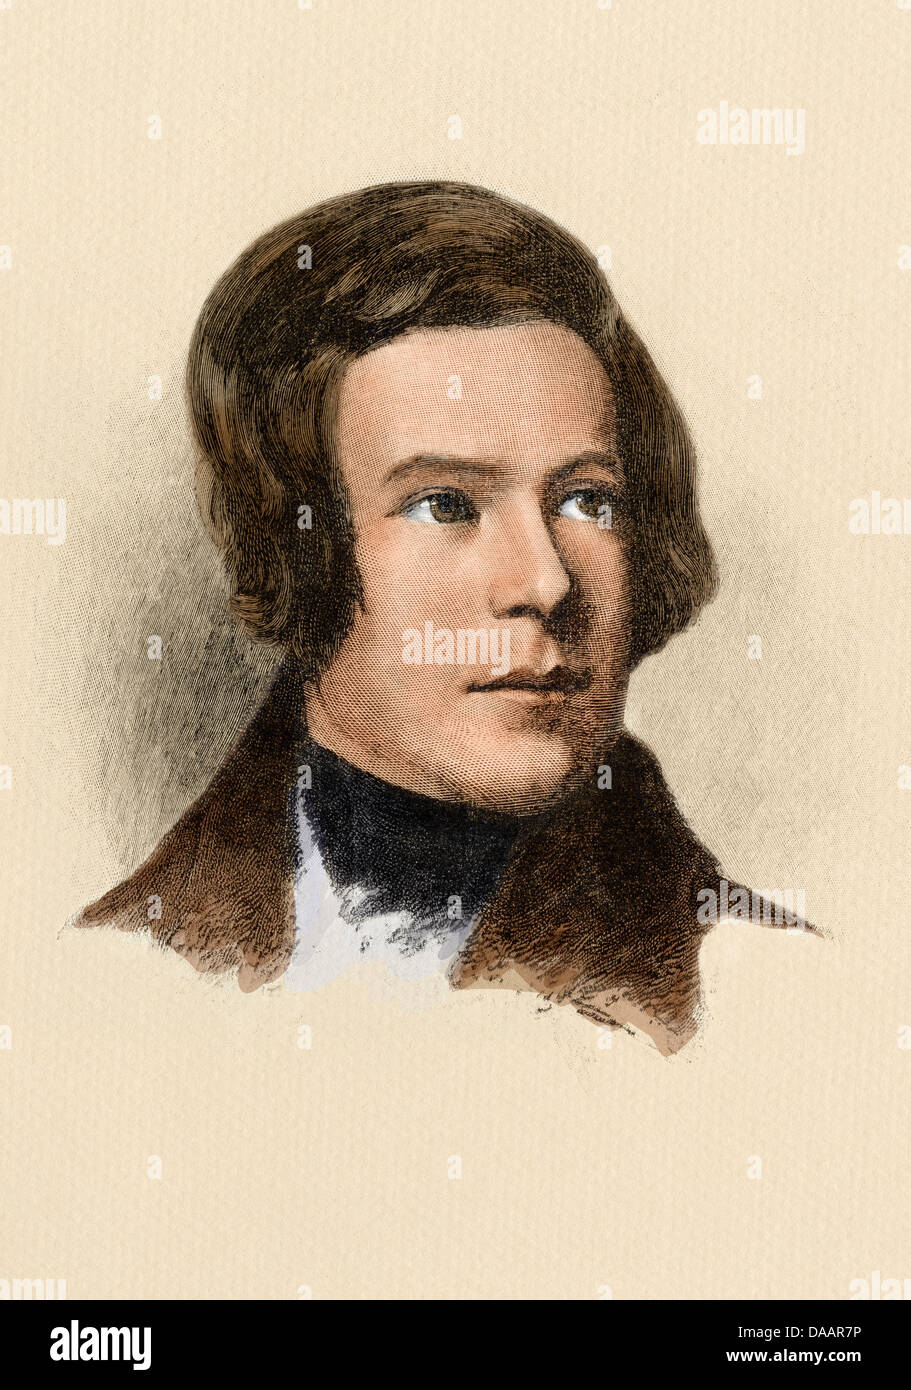 Portrait of the young Robert Schumann while in Vienna.  Digitally colored engraving of a portrait made in Vienna Stock Photo